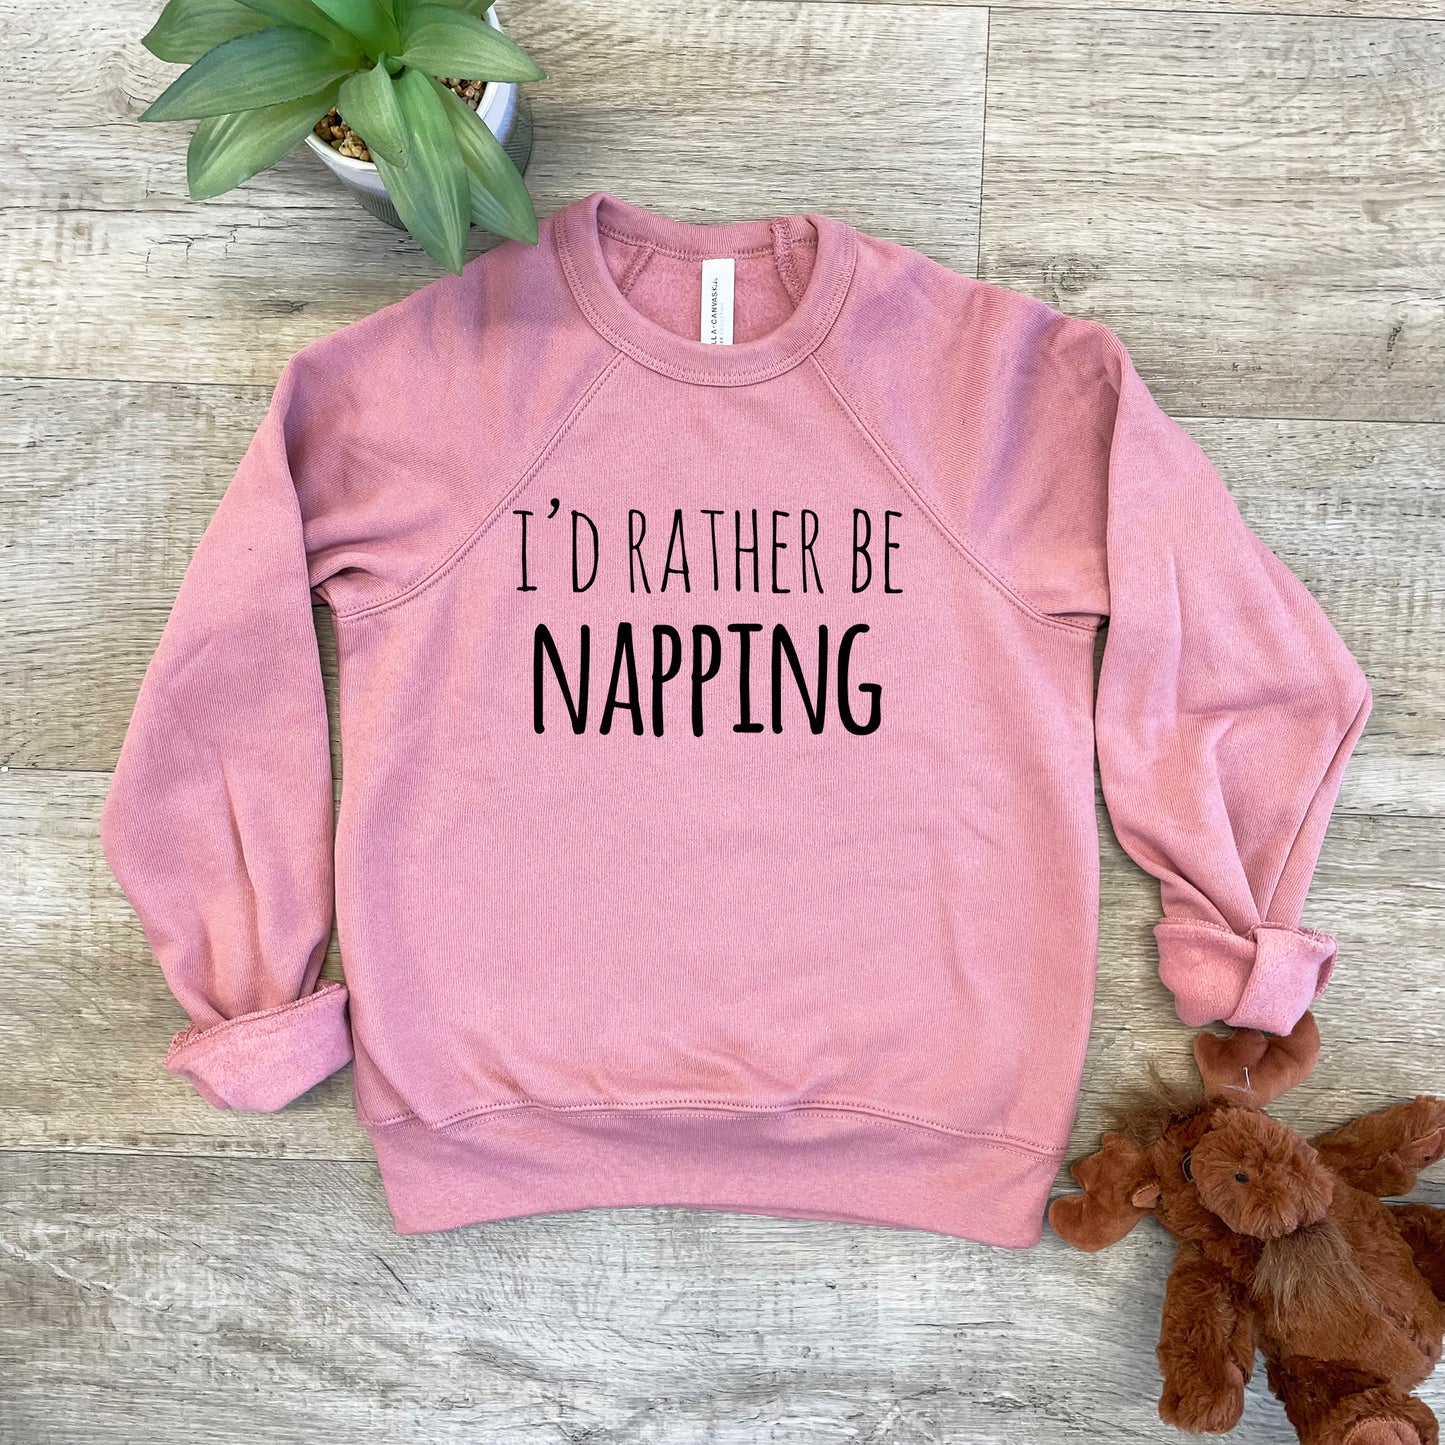 I'd Rather Be Napping - Kid's Sweatshirt - Heather Gray or Mauve